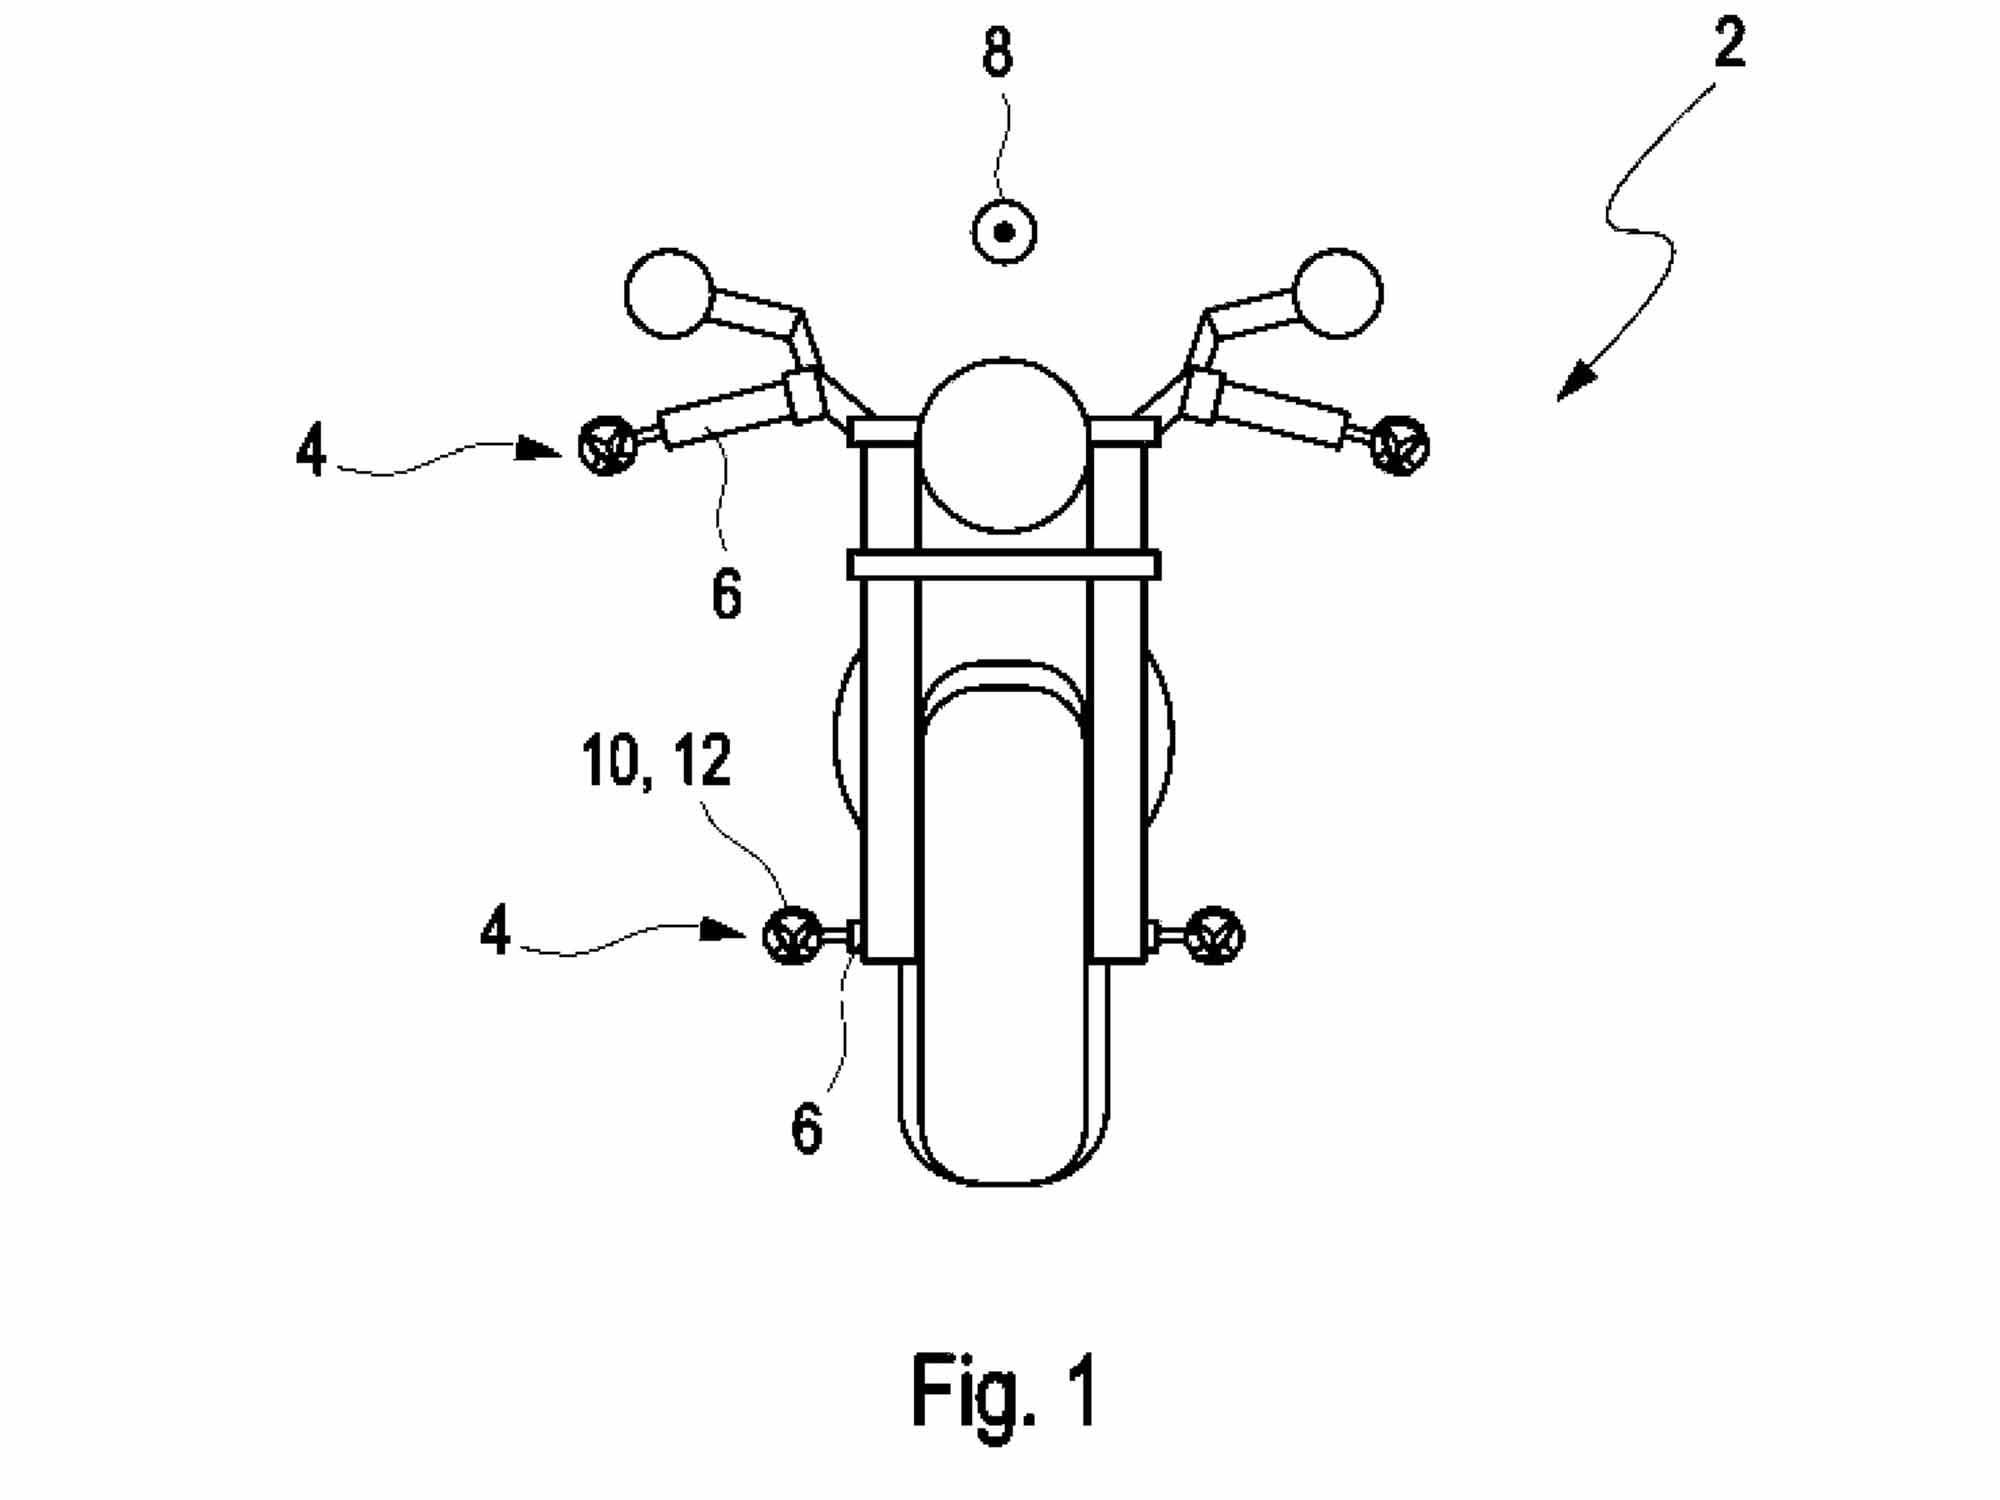 BMW’s latest safety patent uses the idea of passive radar reflectors to help bikes be better seen by a car’s radar.